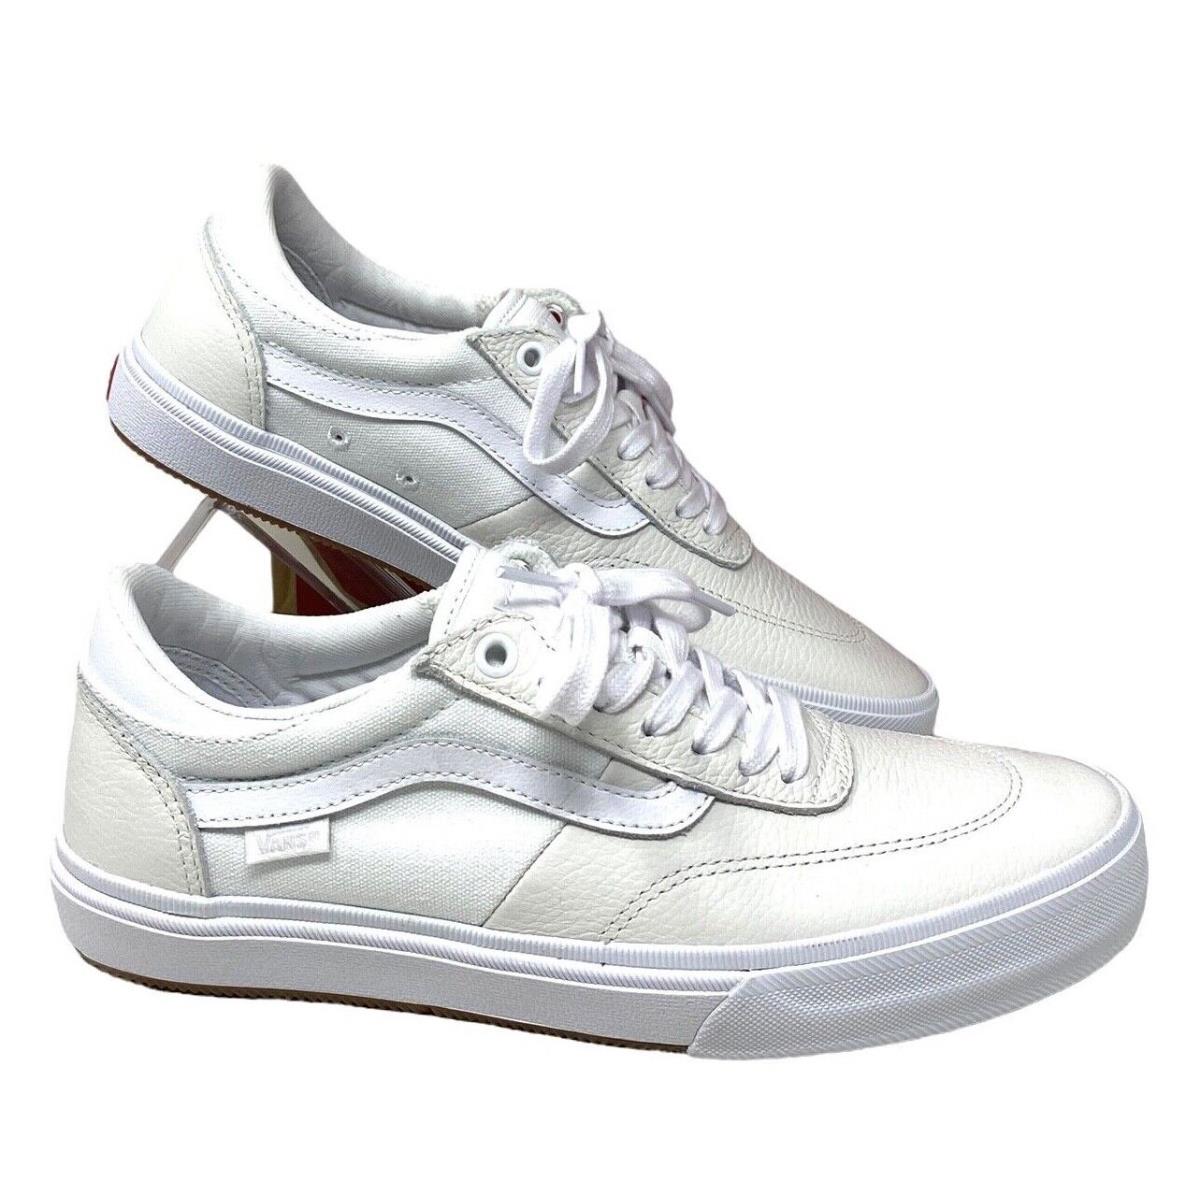 Vans Gilbert Crockett Casual Shoes For Women Leather White Sneakers VN0A5JIFWWW